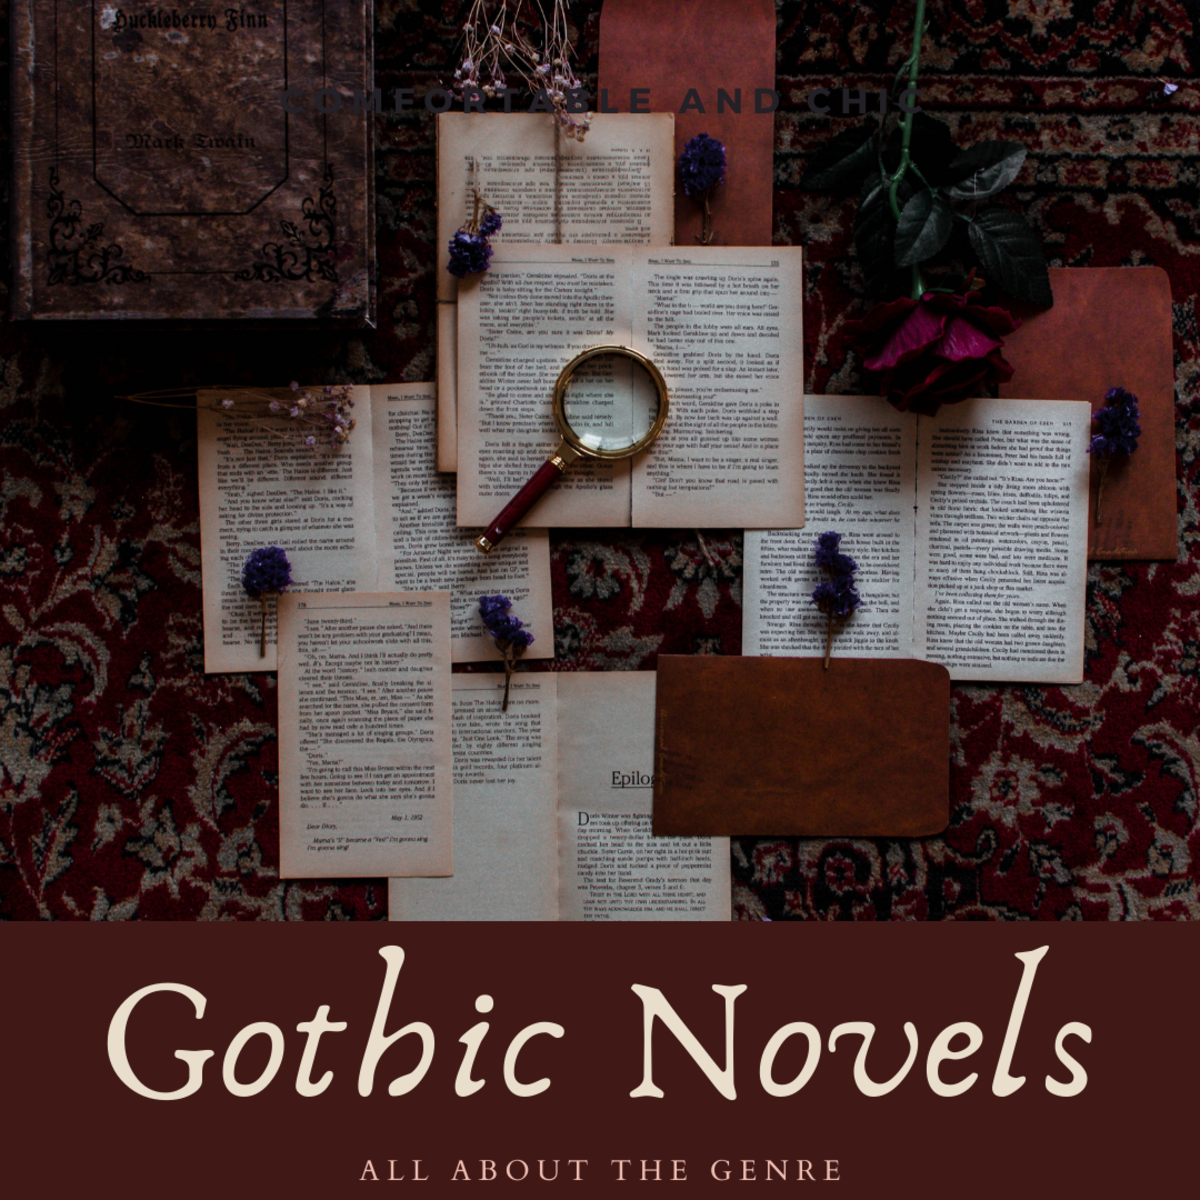 What Is a Gothic Novel? (Definition, History & Examples)